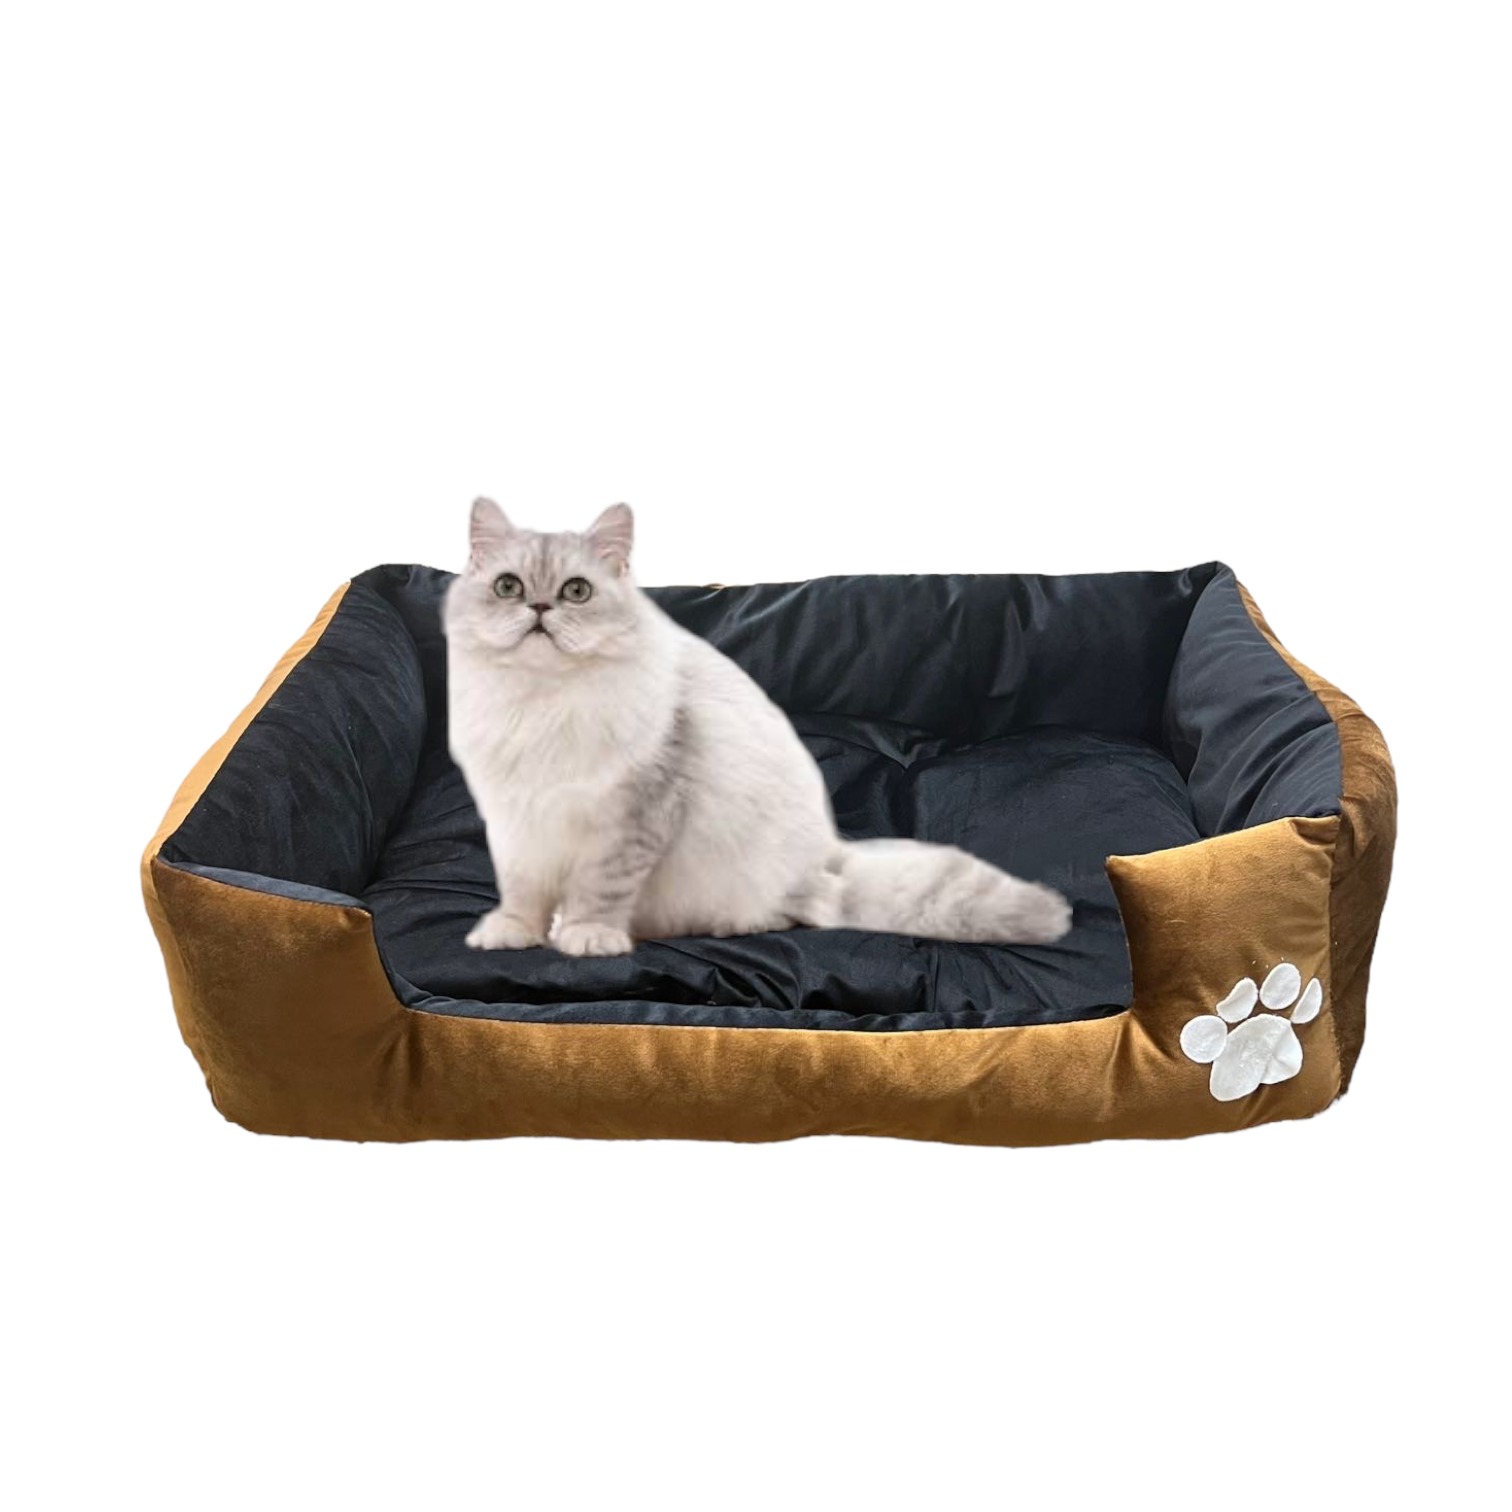 Comfy Paw Pet Bed - XL - For Cats & Small Breed Dogs | Brown And Black